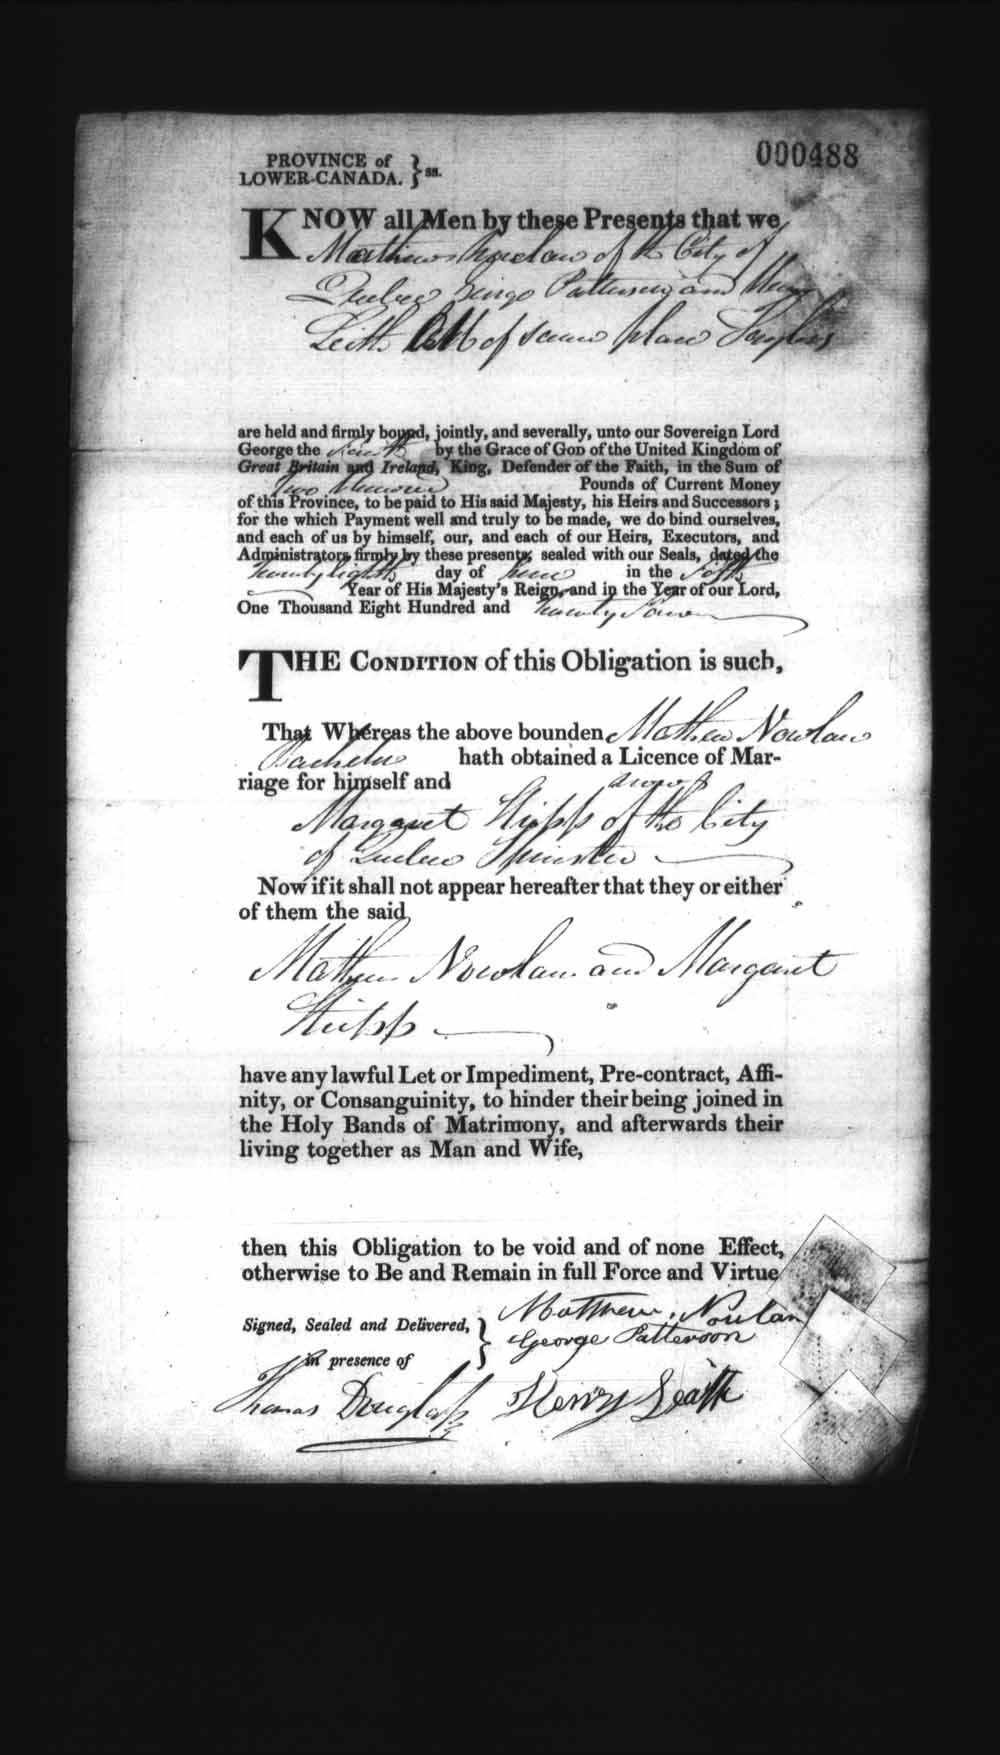 Digitized page of Upper and Lower Canada Marriage Bonds (1779-1865) for Image No.: e008236400